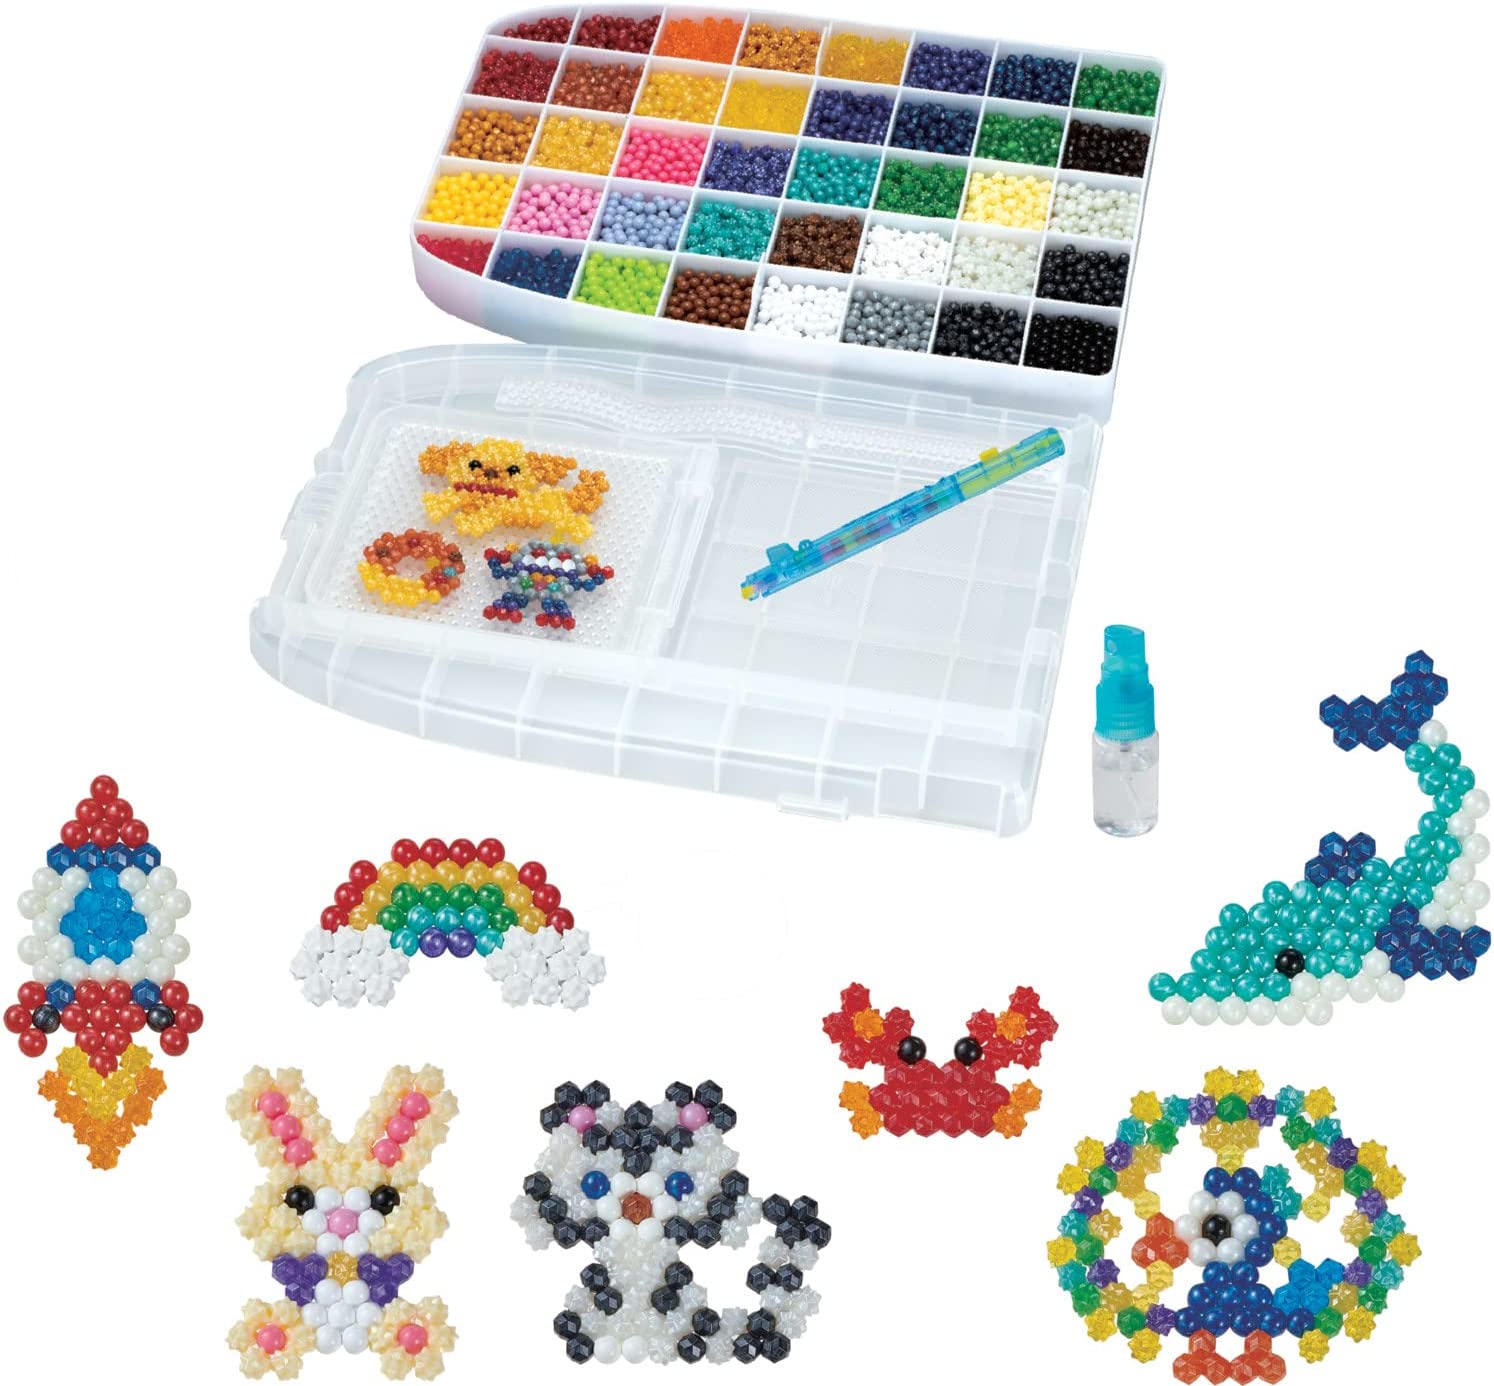 Aquabeads Deluxe Craft Backpack 1000 Beads - Breazy Beach